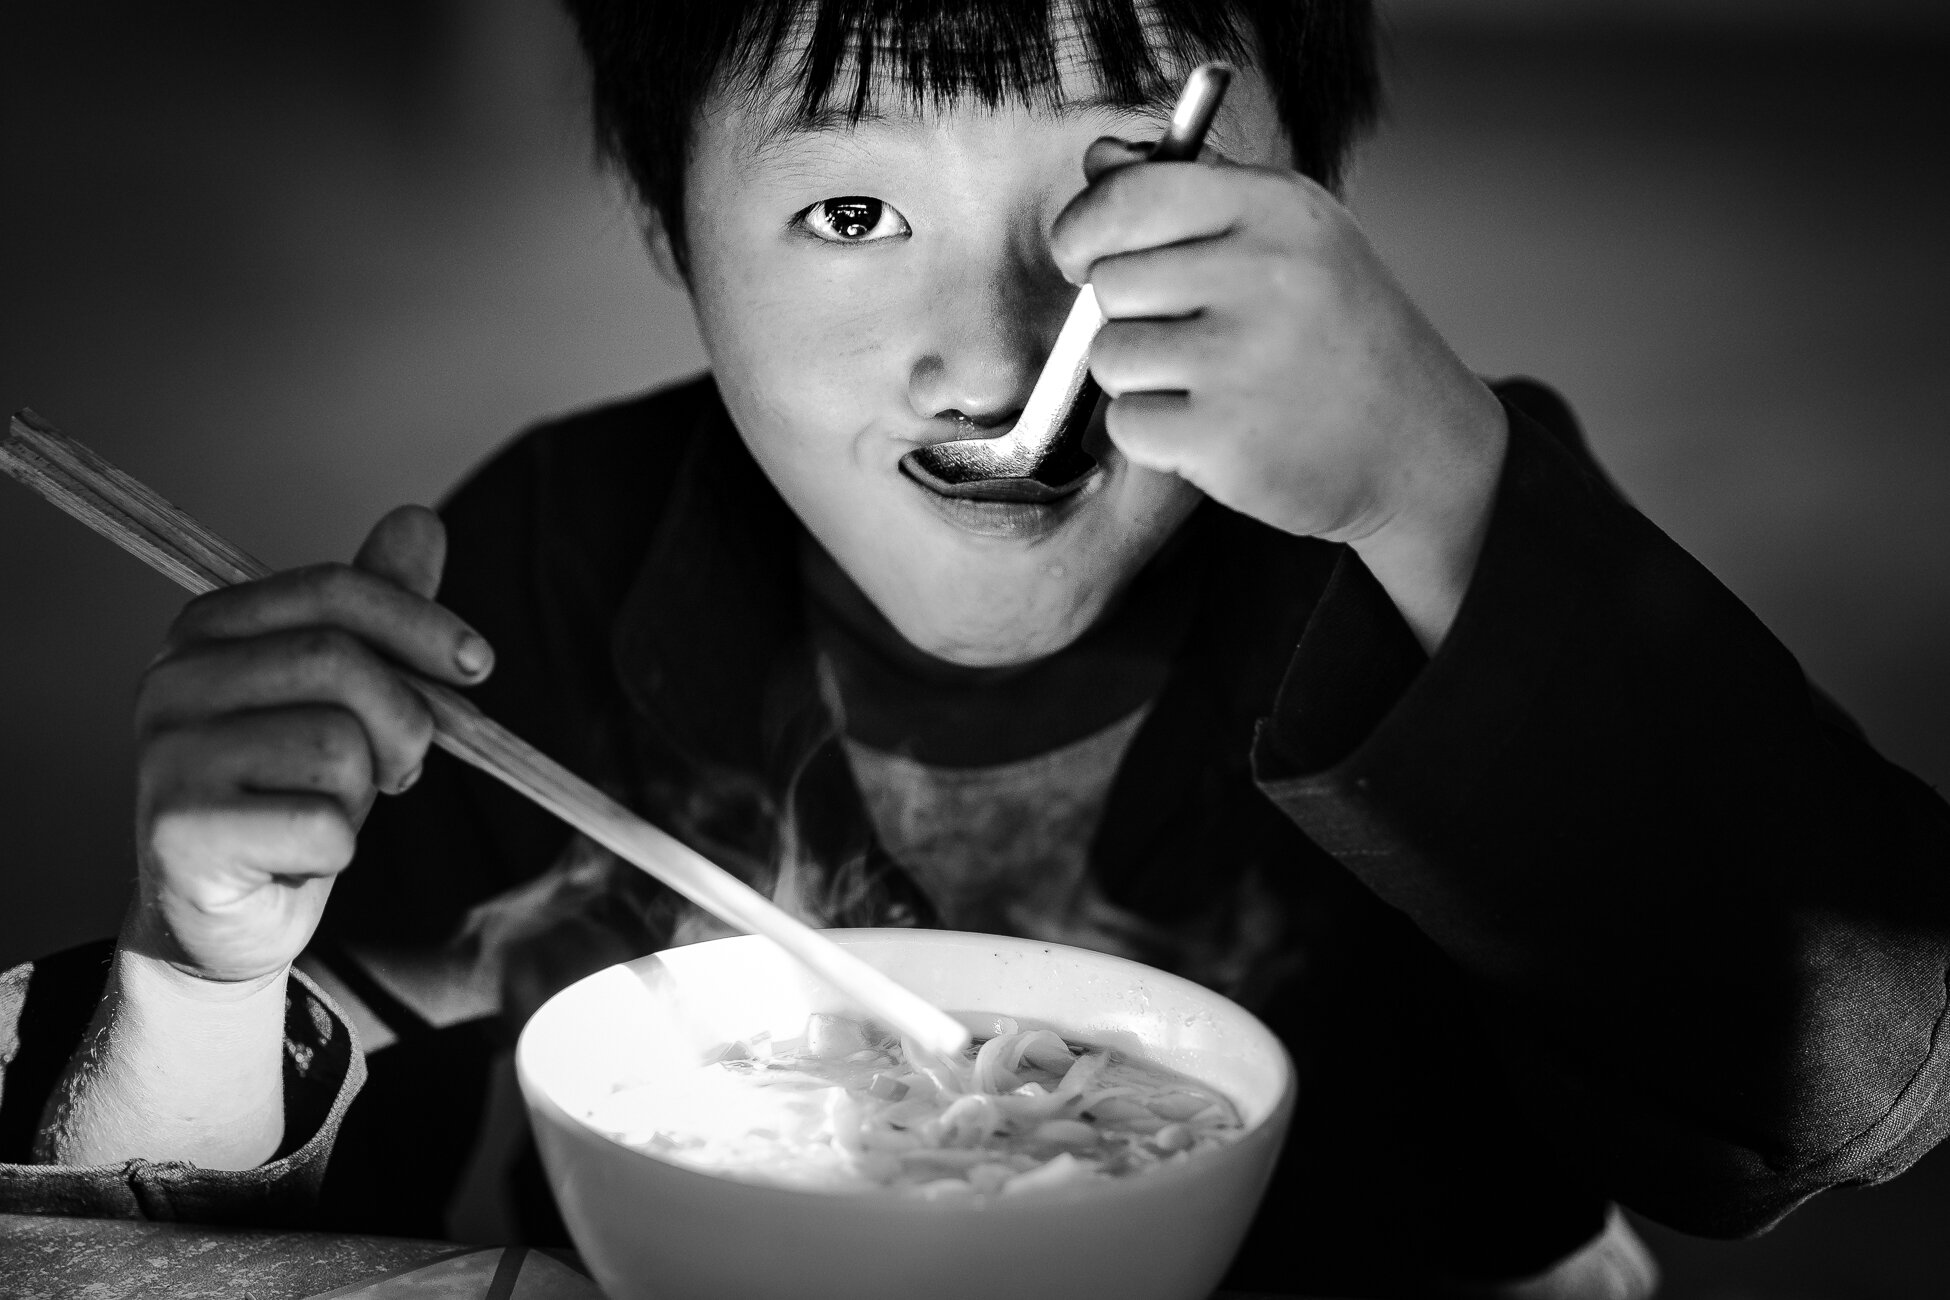 A young boy having pho noodles in Dong van market in northern vi